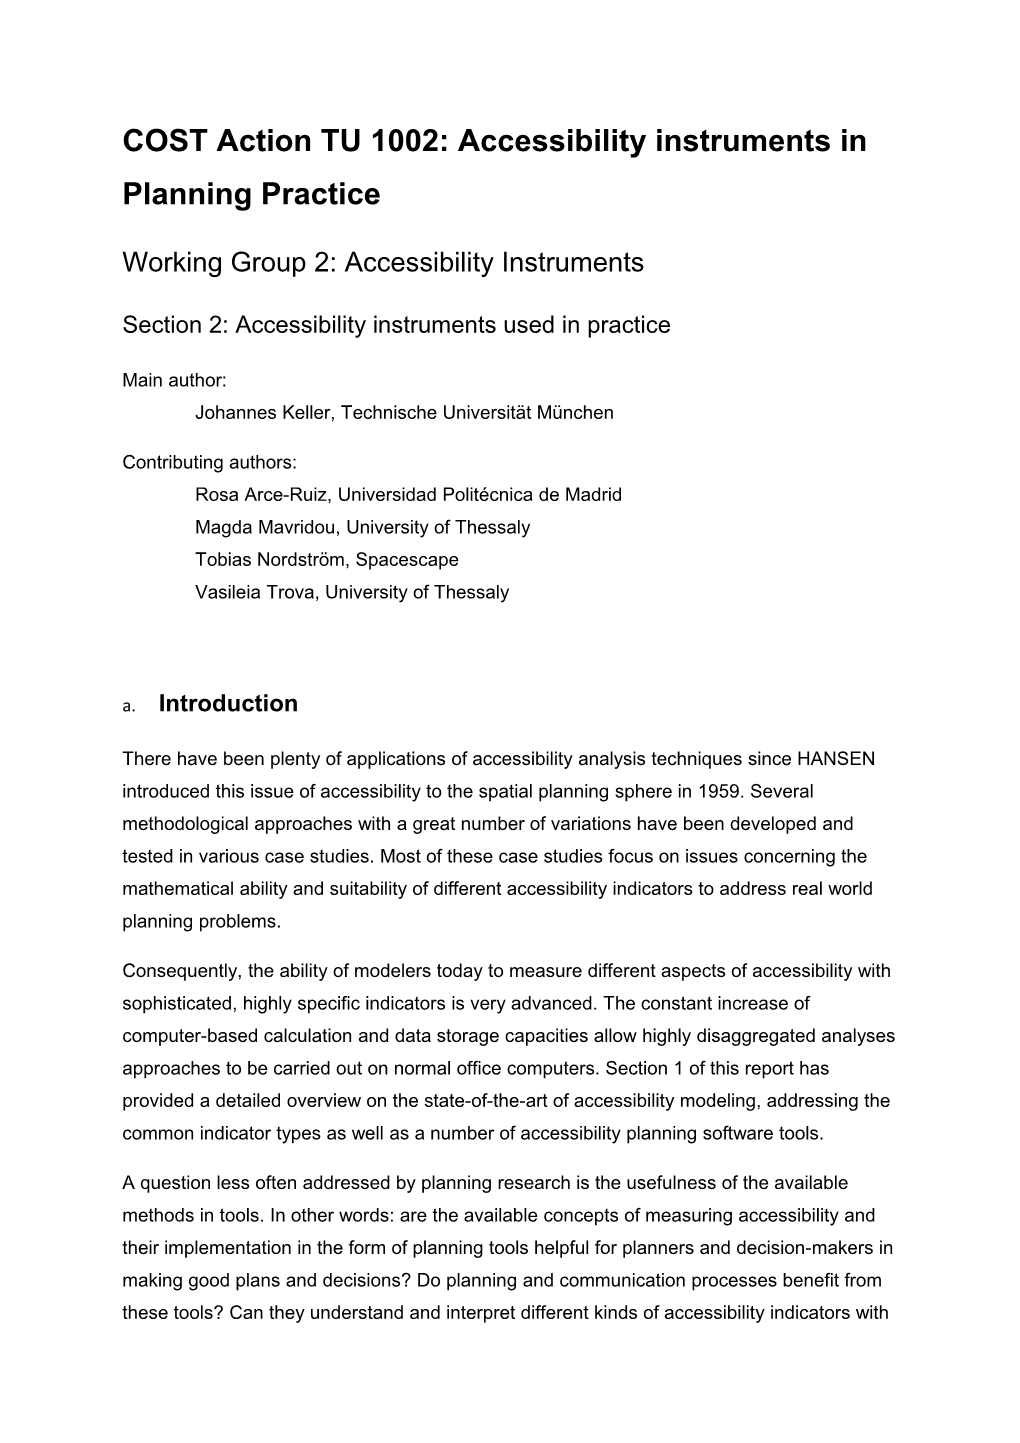 COST Action TU 1002: Accessibility Instruments in Planning Practice